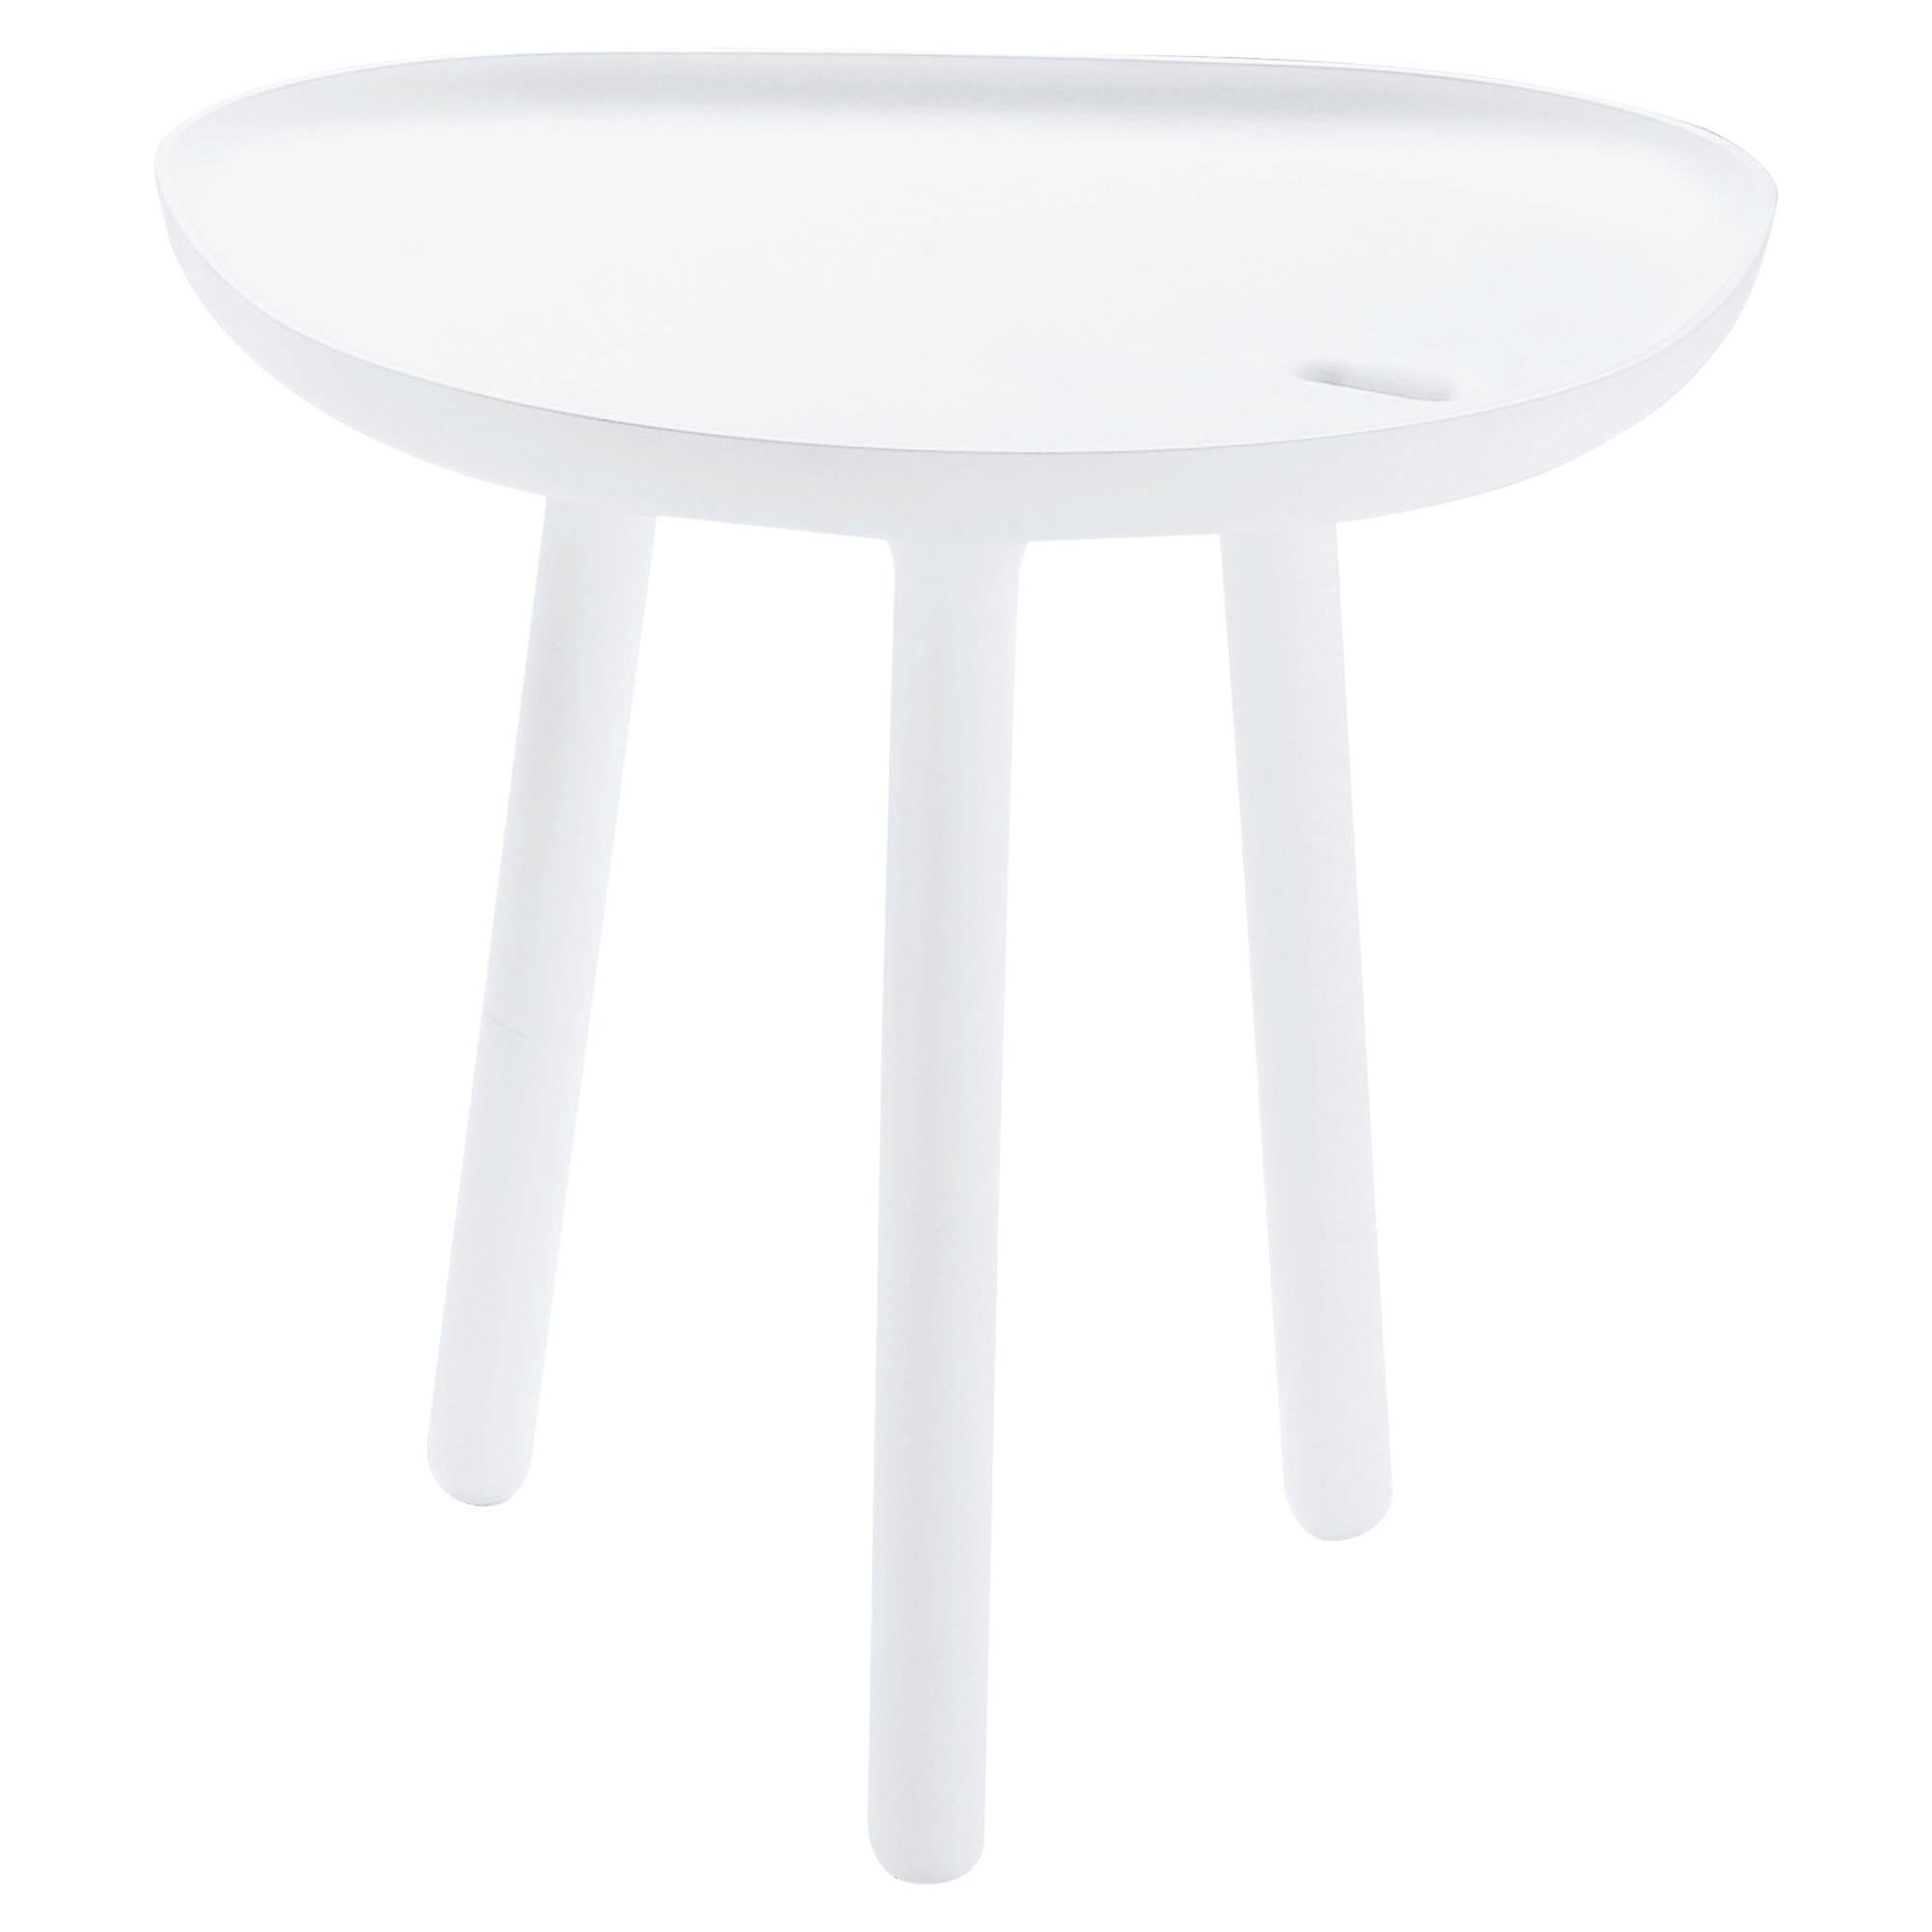 Zanotta Loto Small Table in White Acrylic Resin by Ludovica+Roberto Palomba For Sale